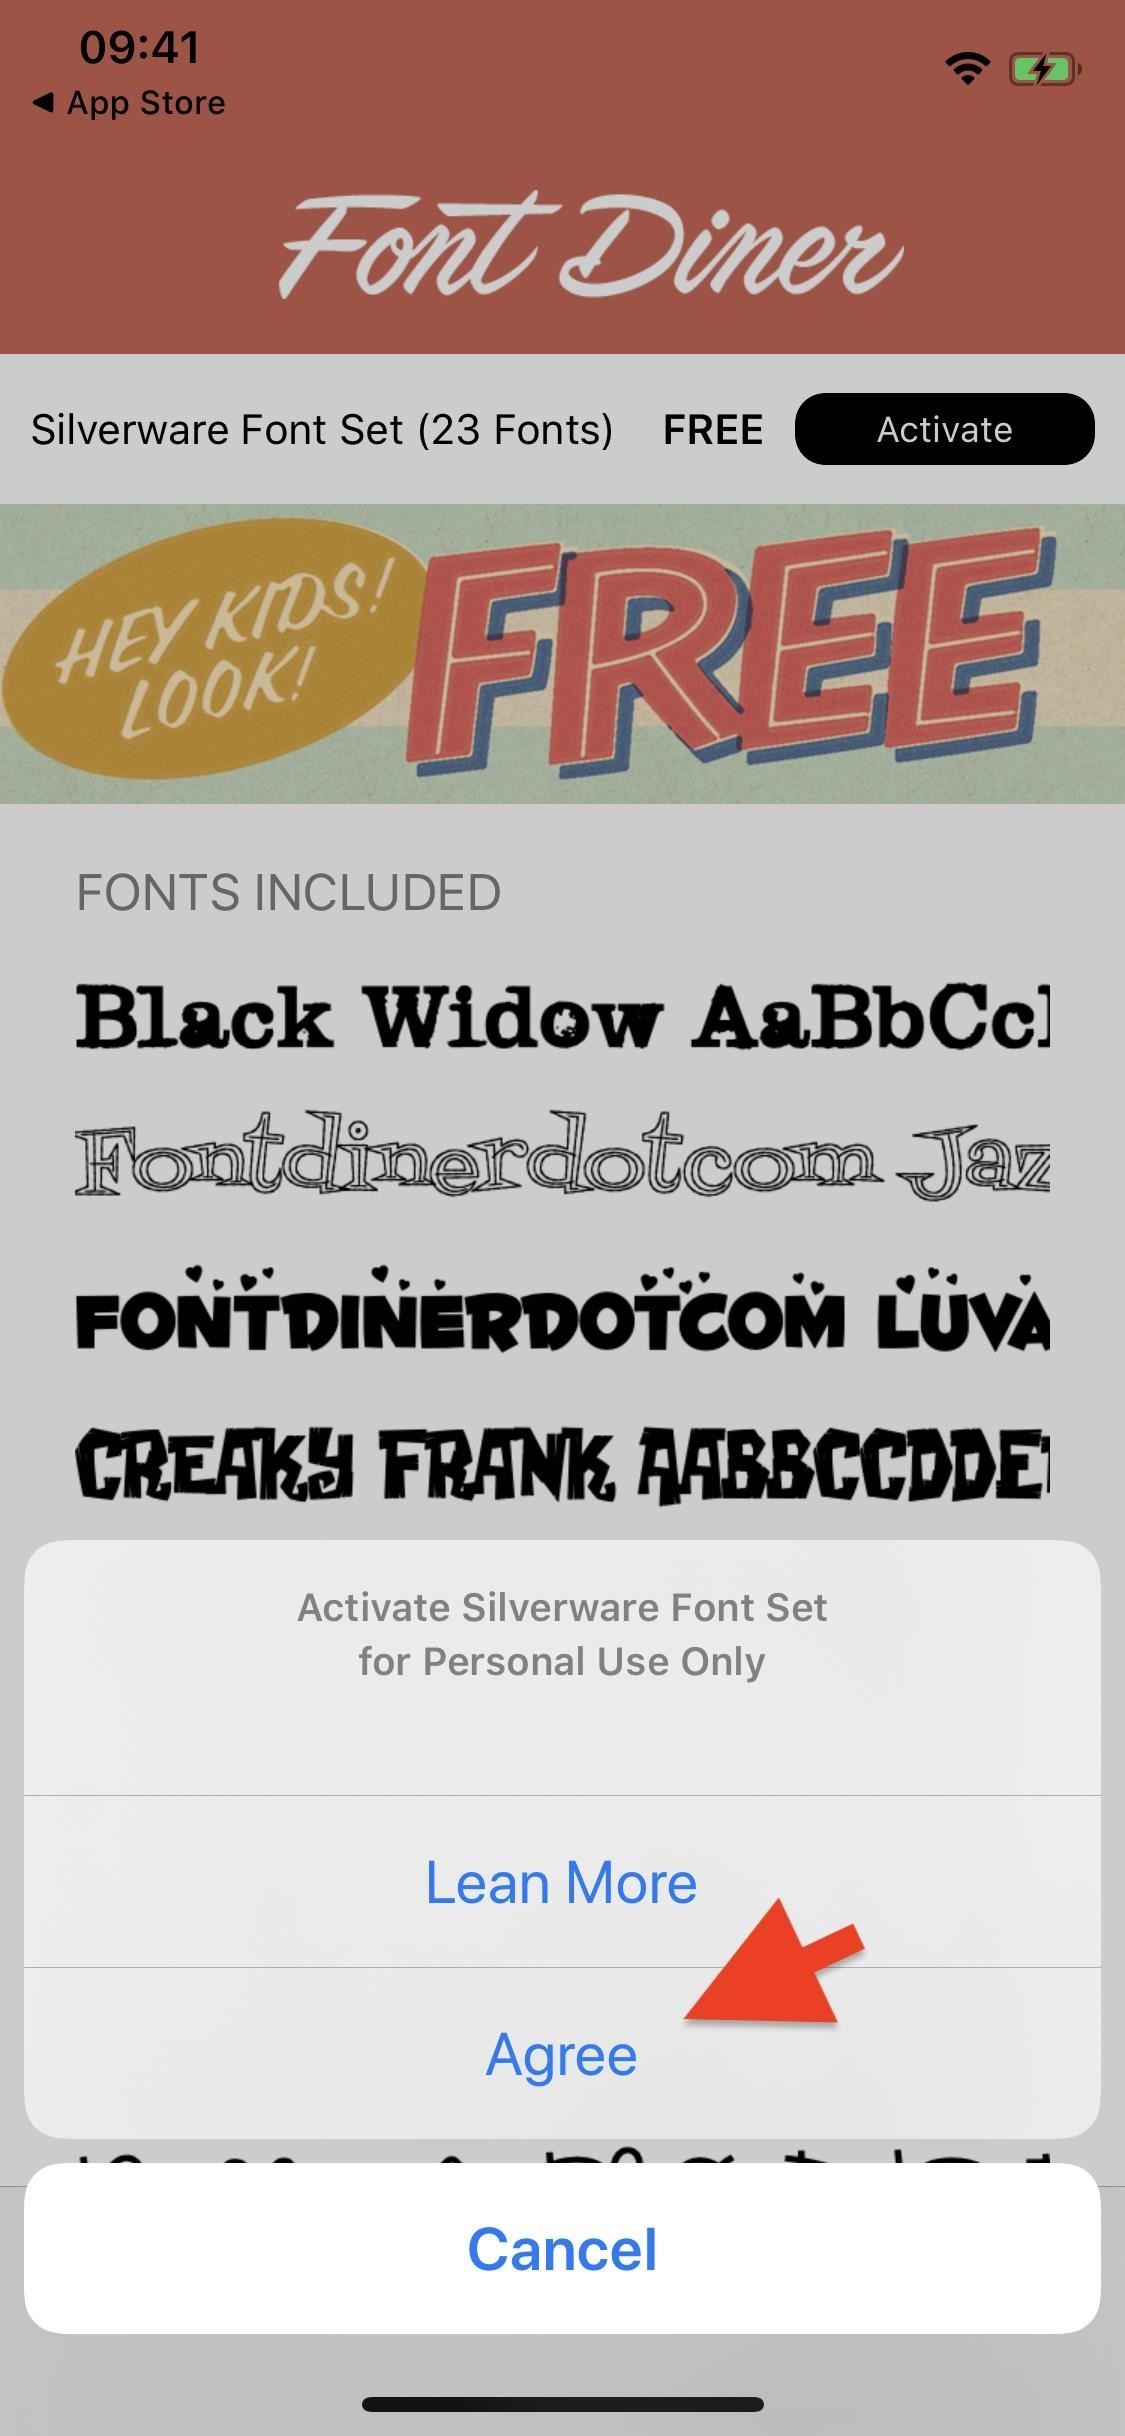 How to Download & Install Custom Fonts on Your iPhone in iOS 13